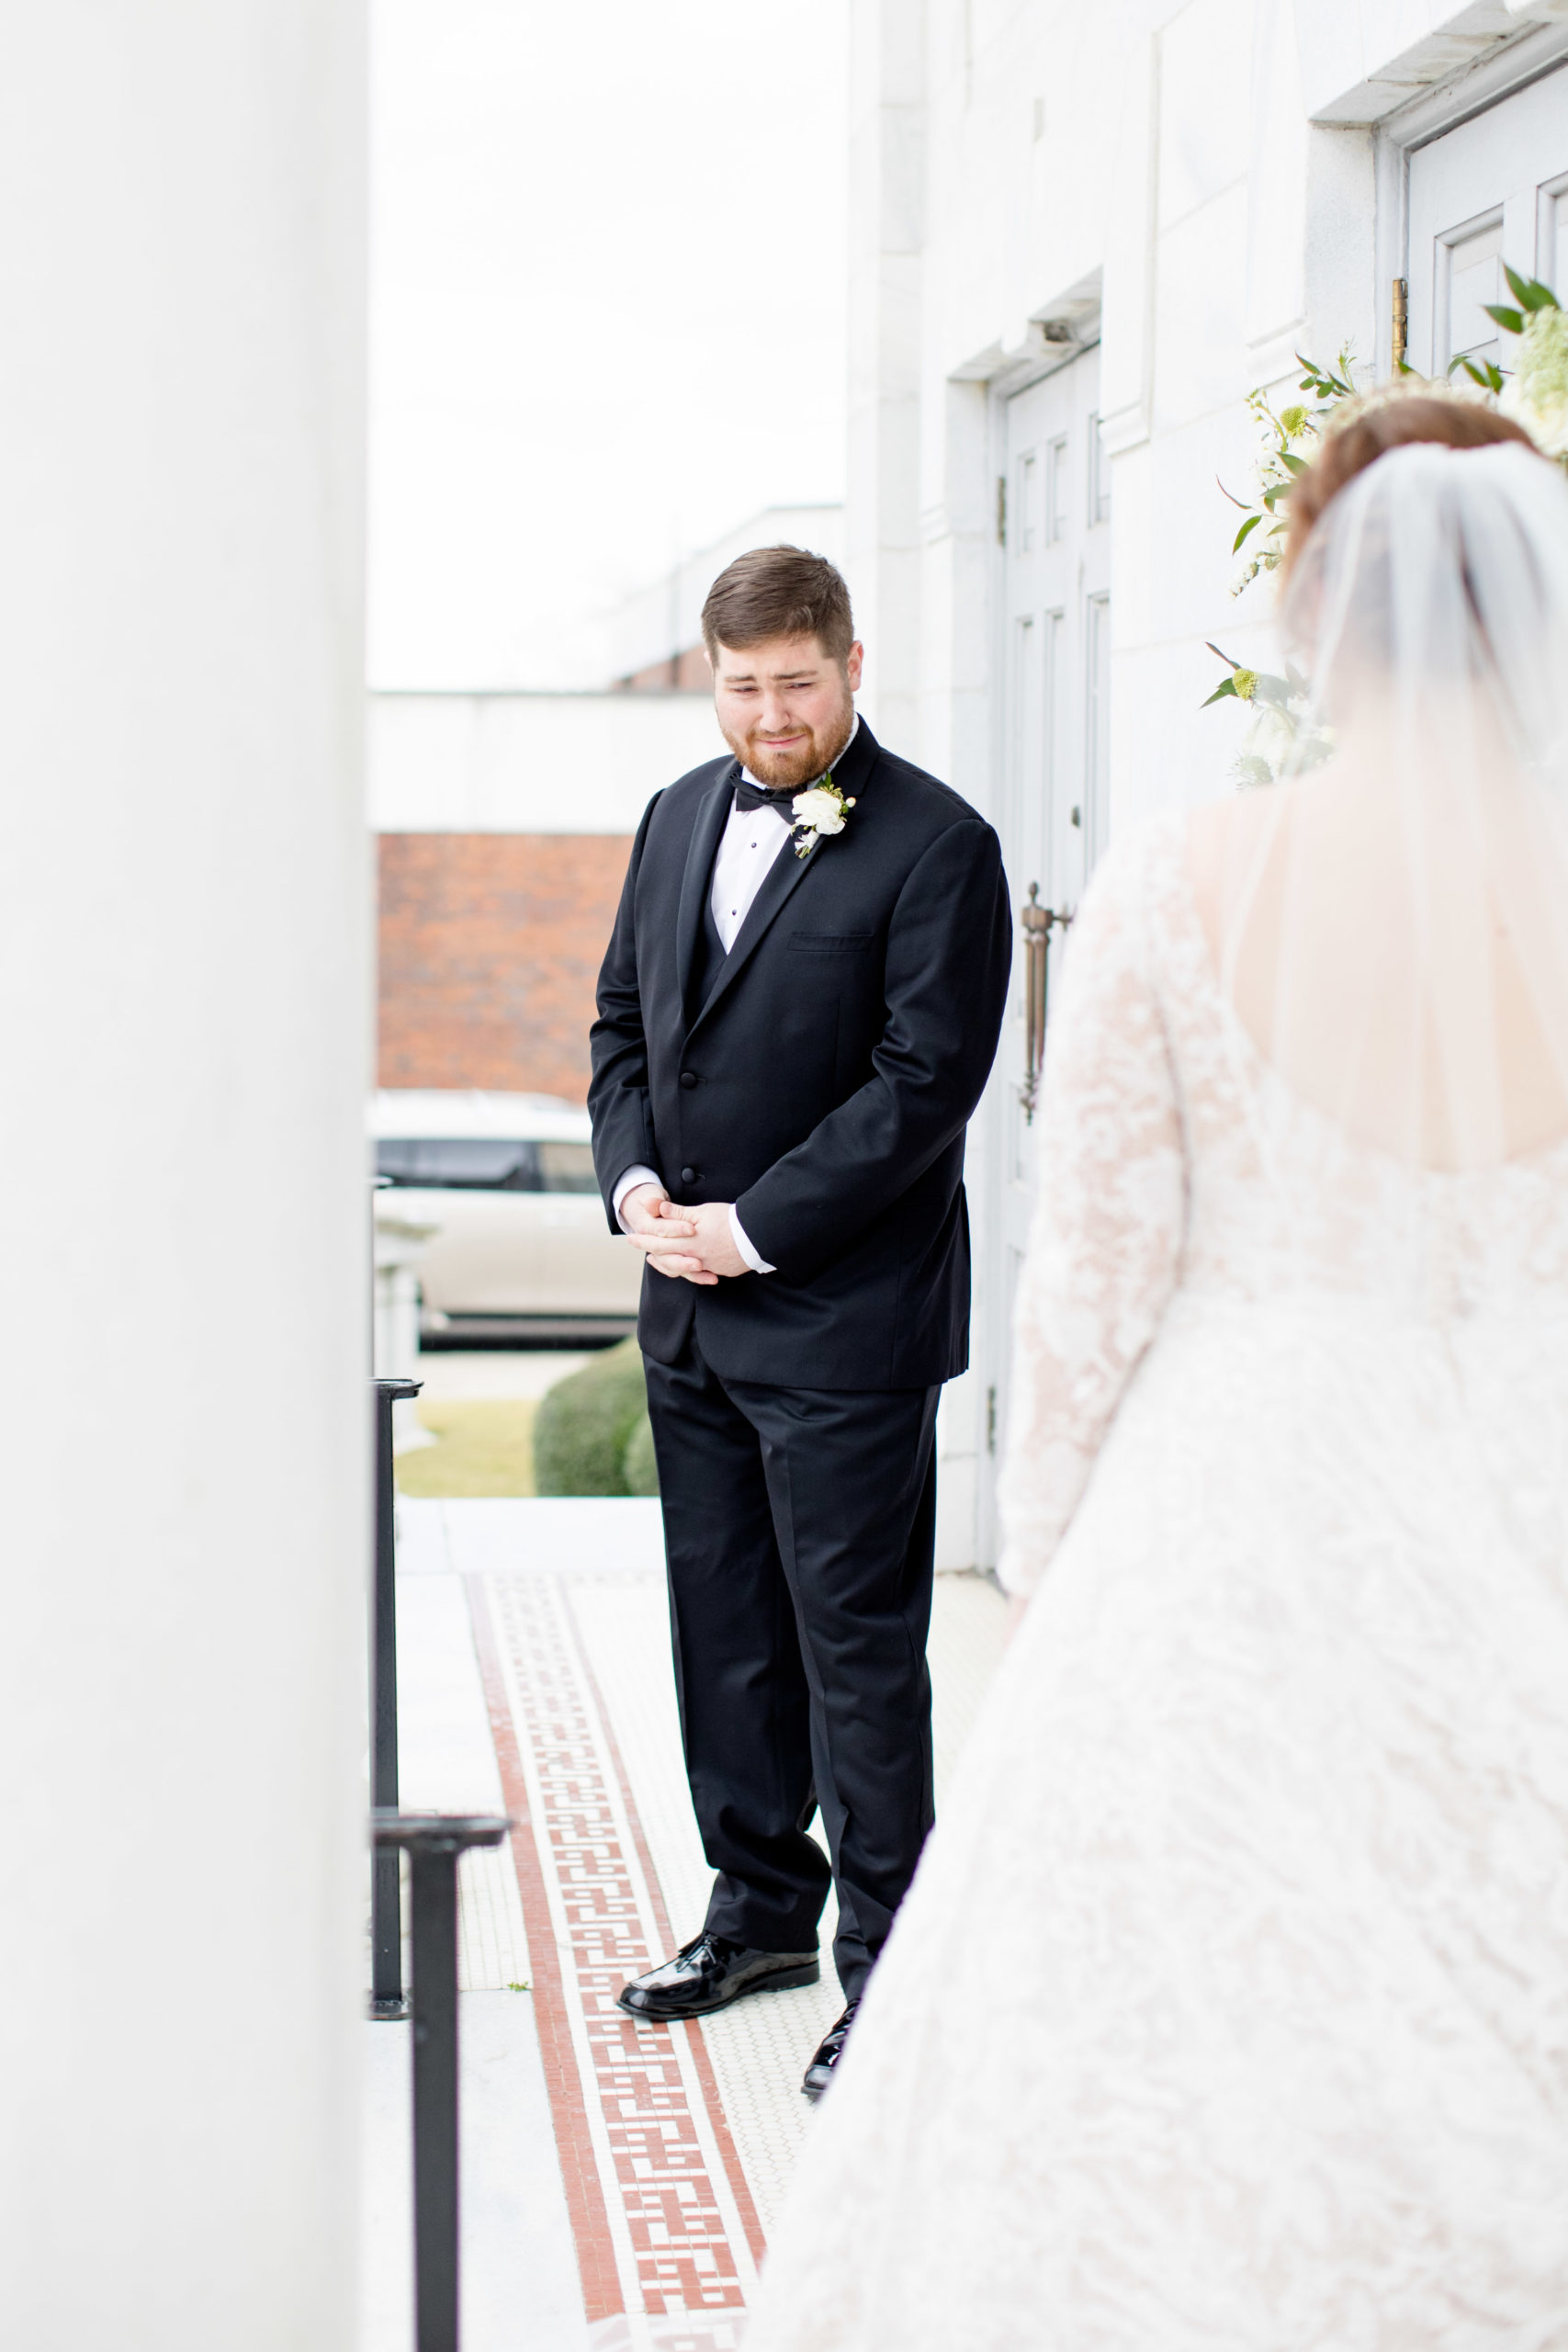 Groom starts to cry during first look.